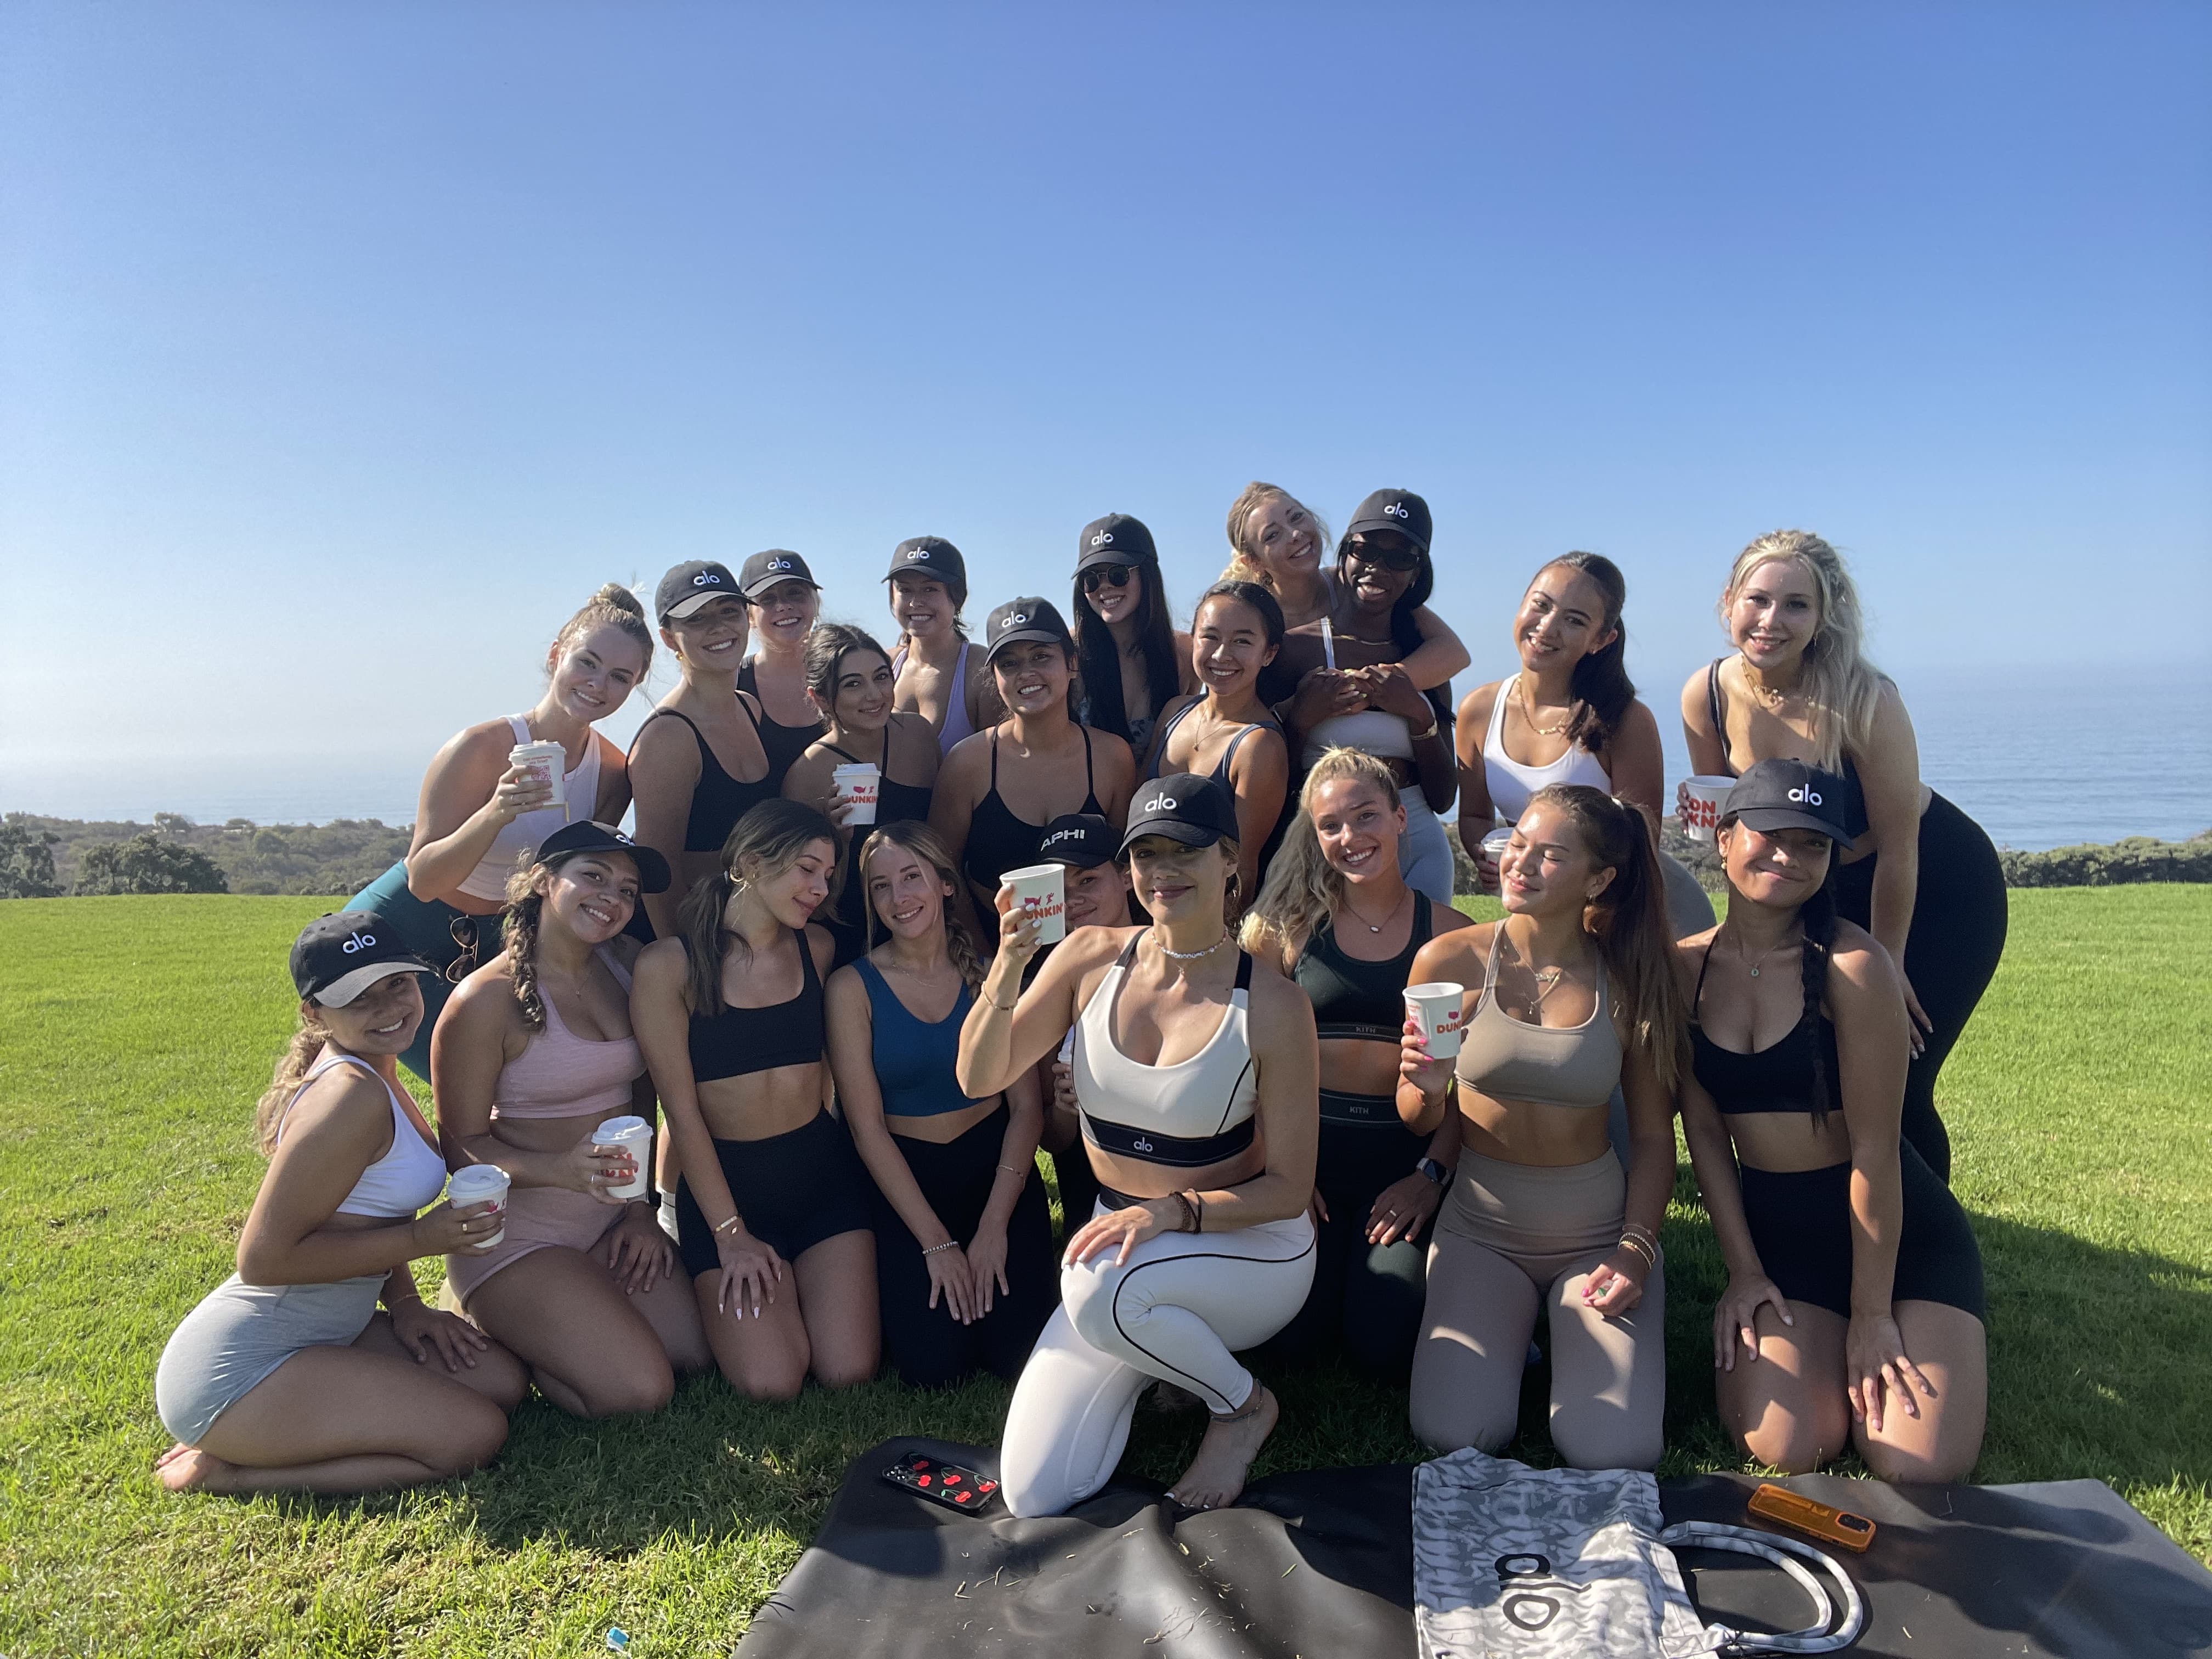 A photo of Britt Turpack and young women from Pepperdine posing for a group photo on a grassy hill overlooking the ocean after practicing yoga with Alo for National Yoga Month.  